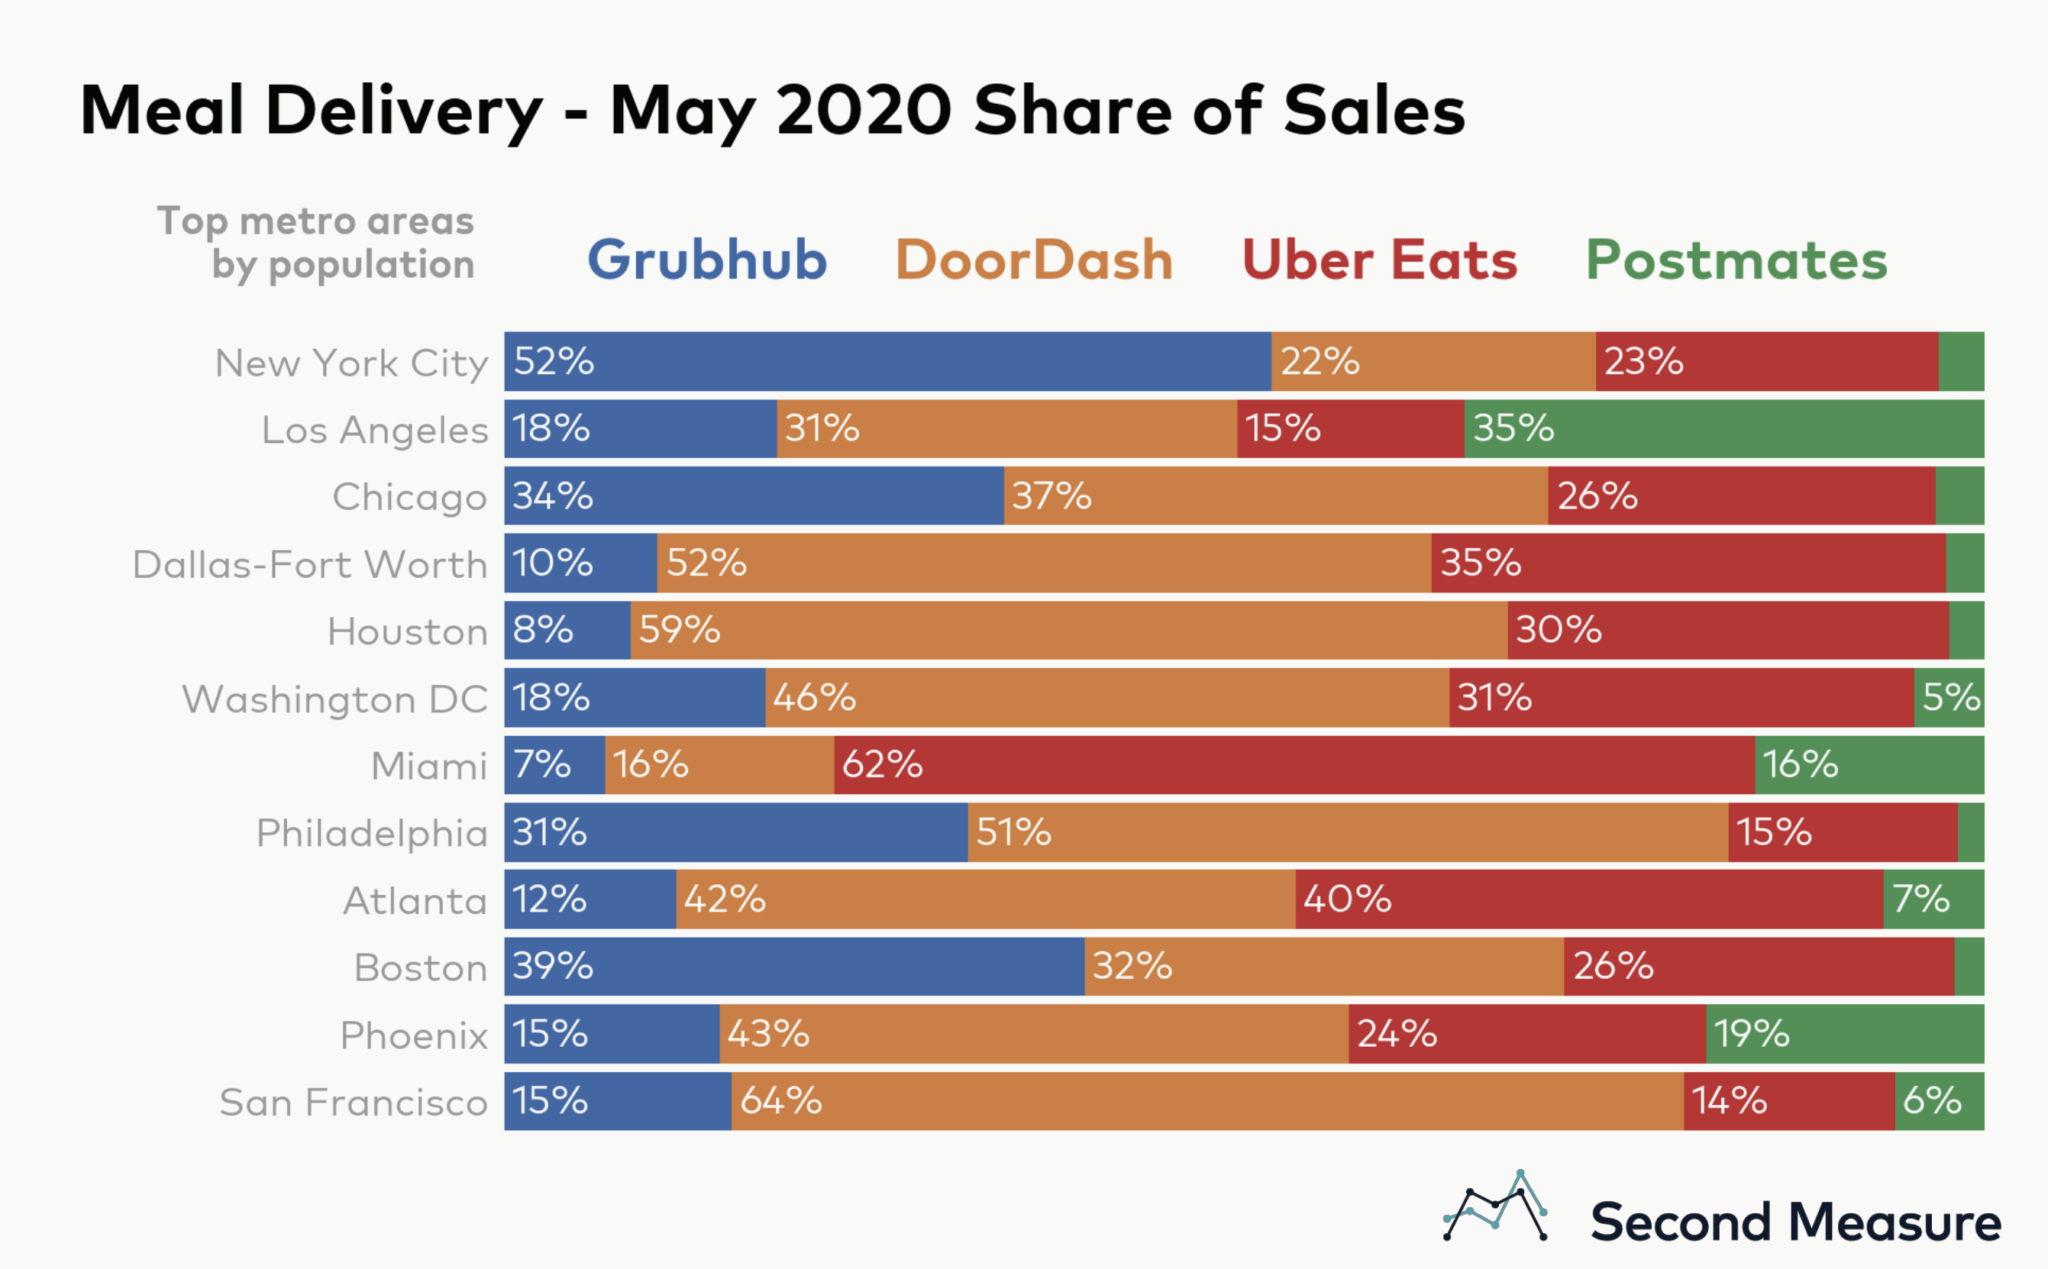 Meal delivery - May 2020 share of sales